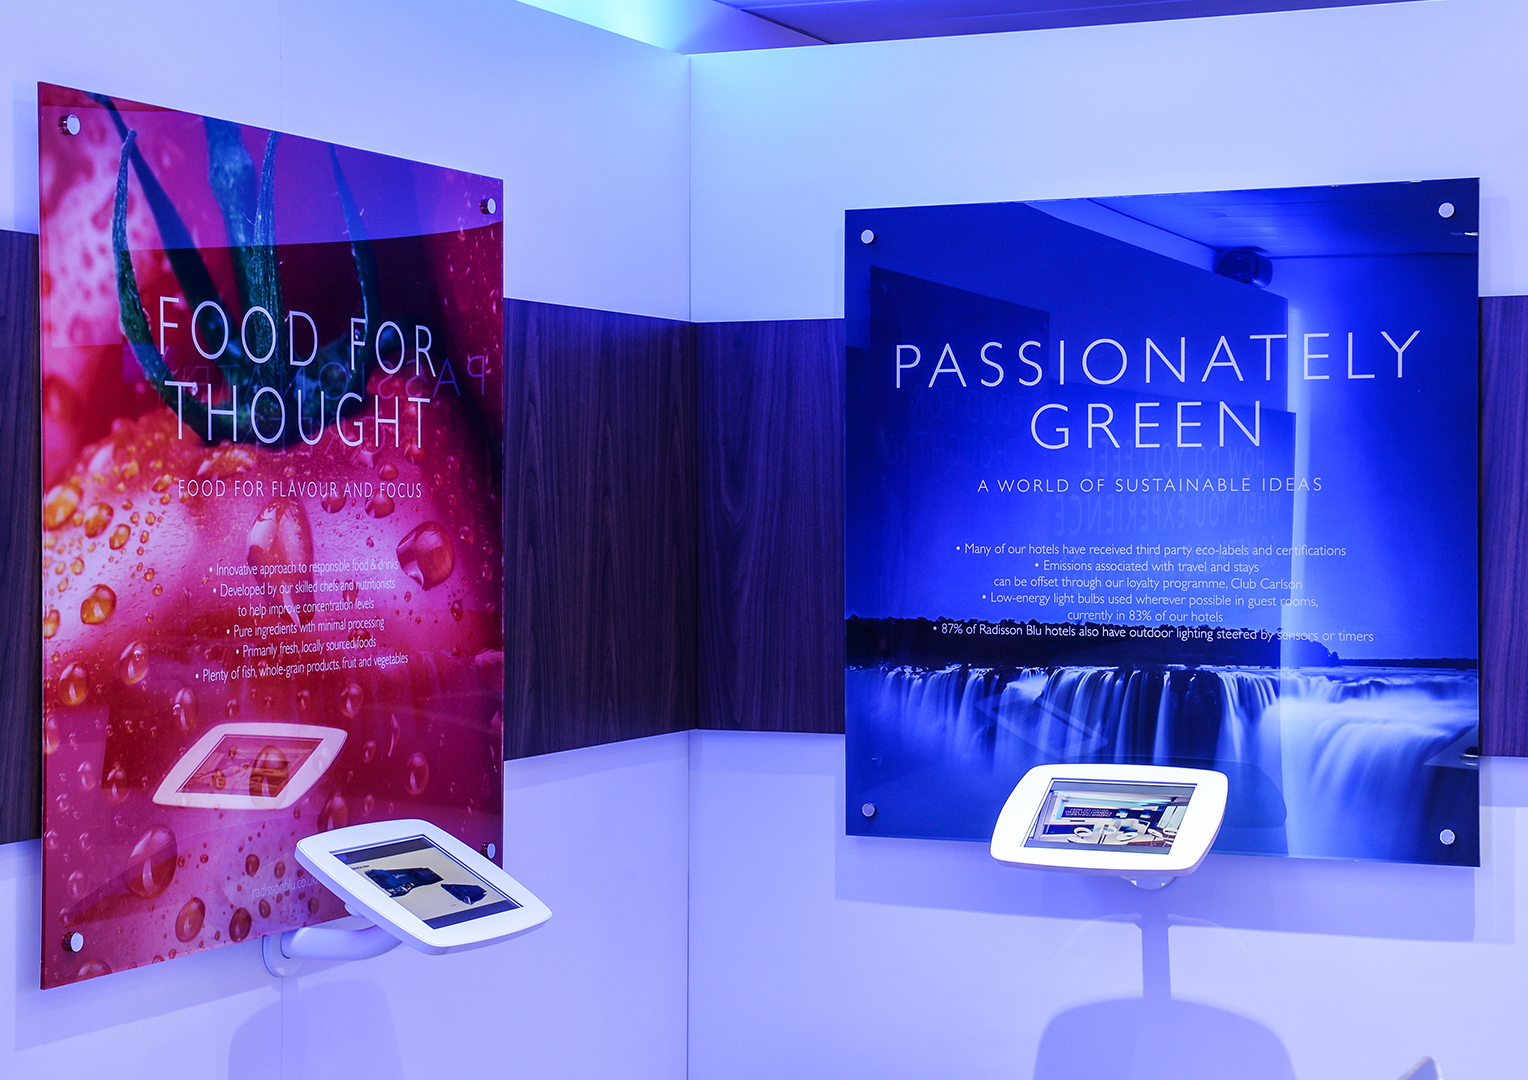 Radisson Blu Hotels. Experience Meetings Truck. Large format branding. Creative artwork and graphic design.